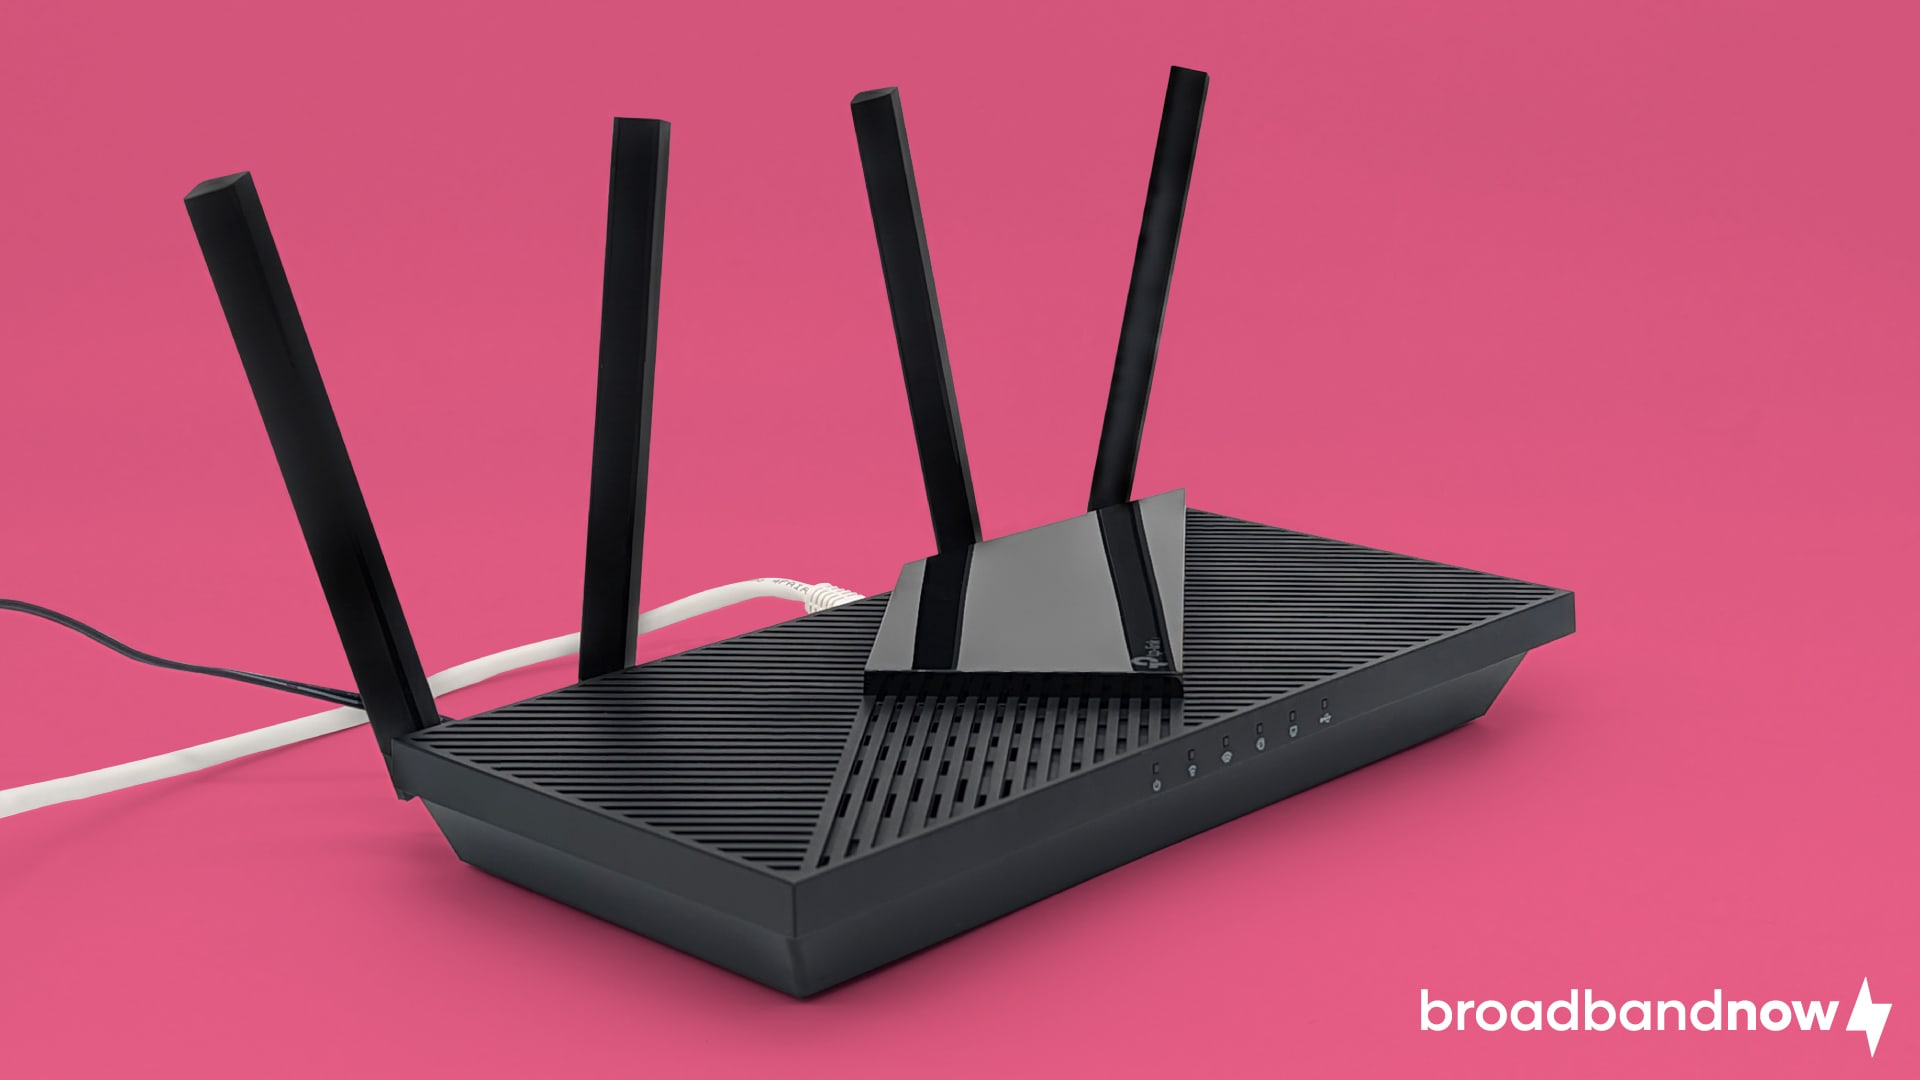 TP-Link AX55 Wi-Fi router on a pink background